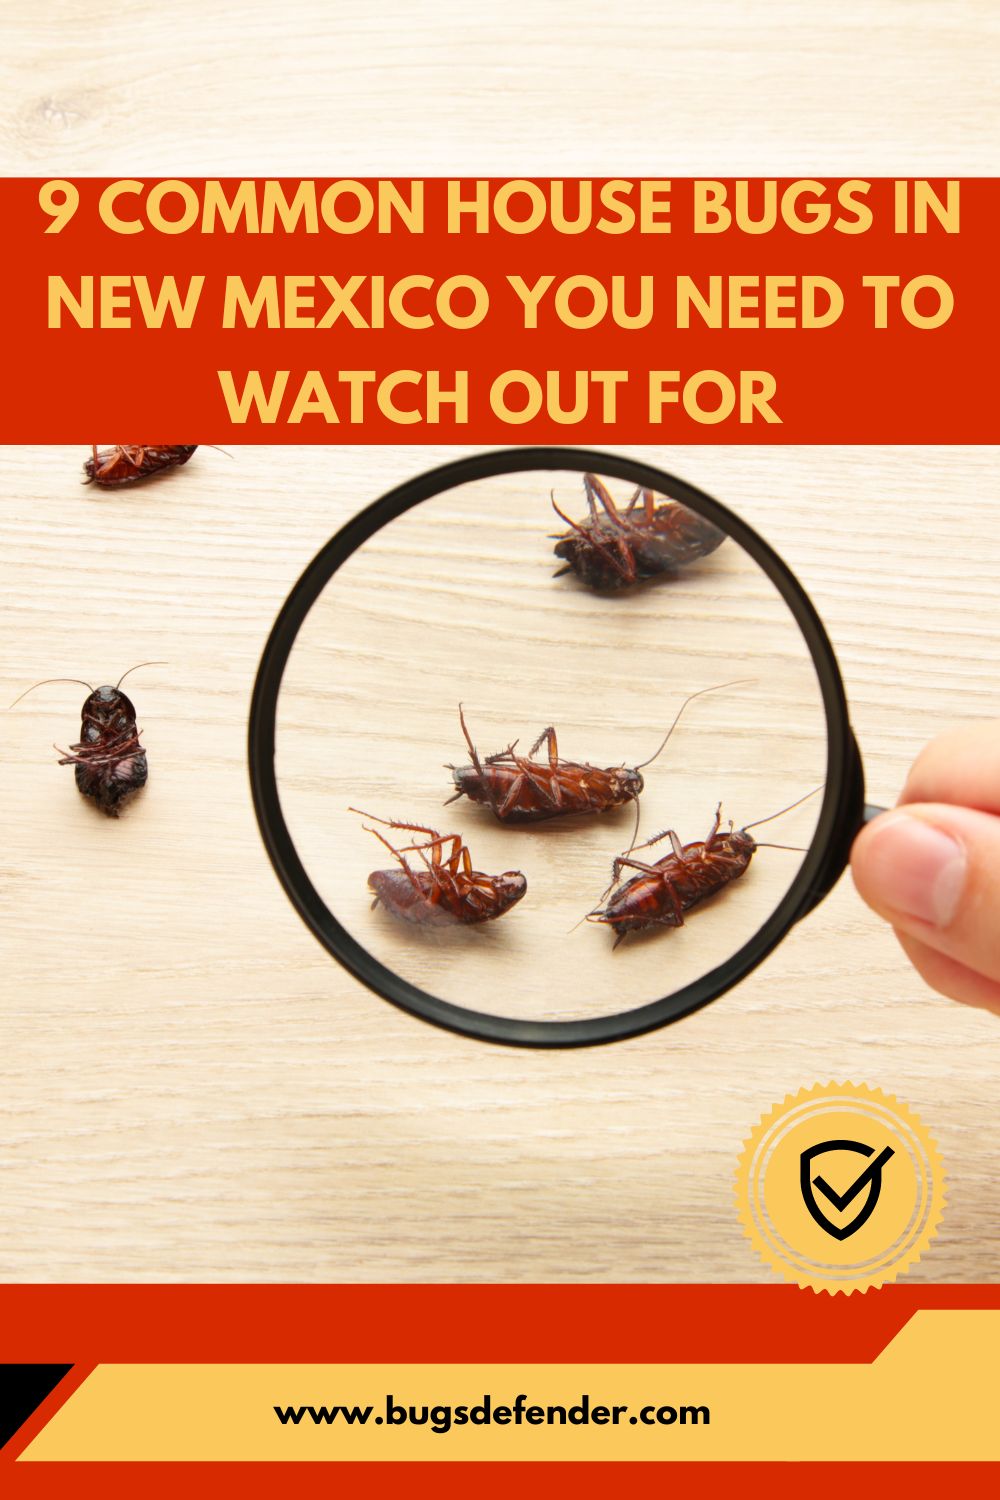 9 Common House Bugs In New Mexico You Need To Watch Out For pin 2